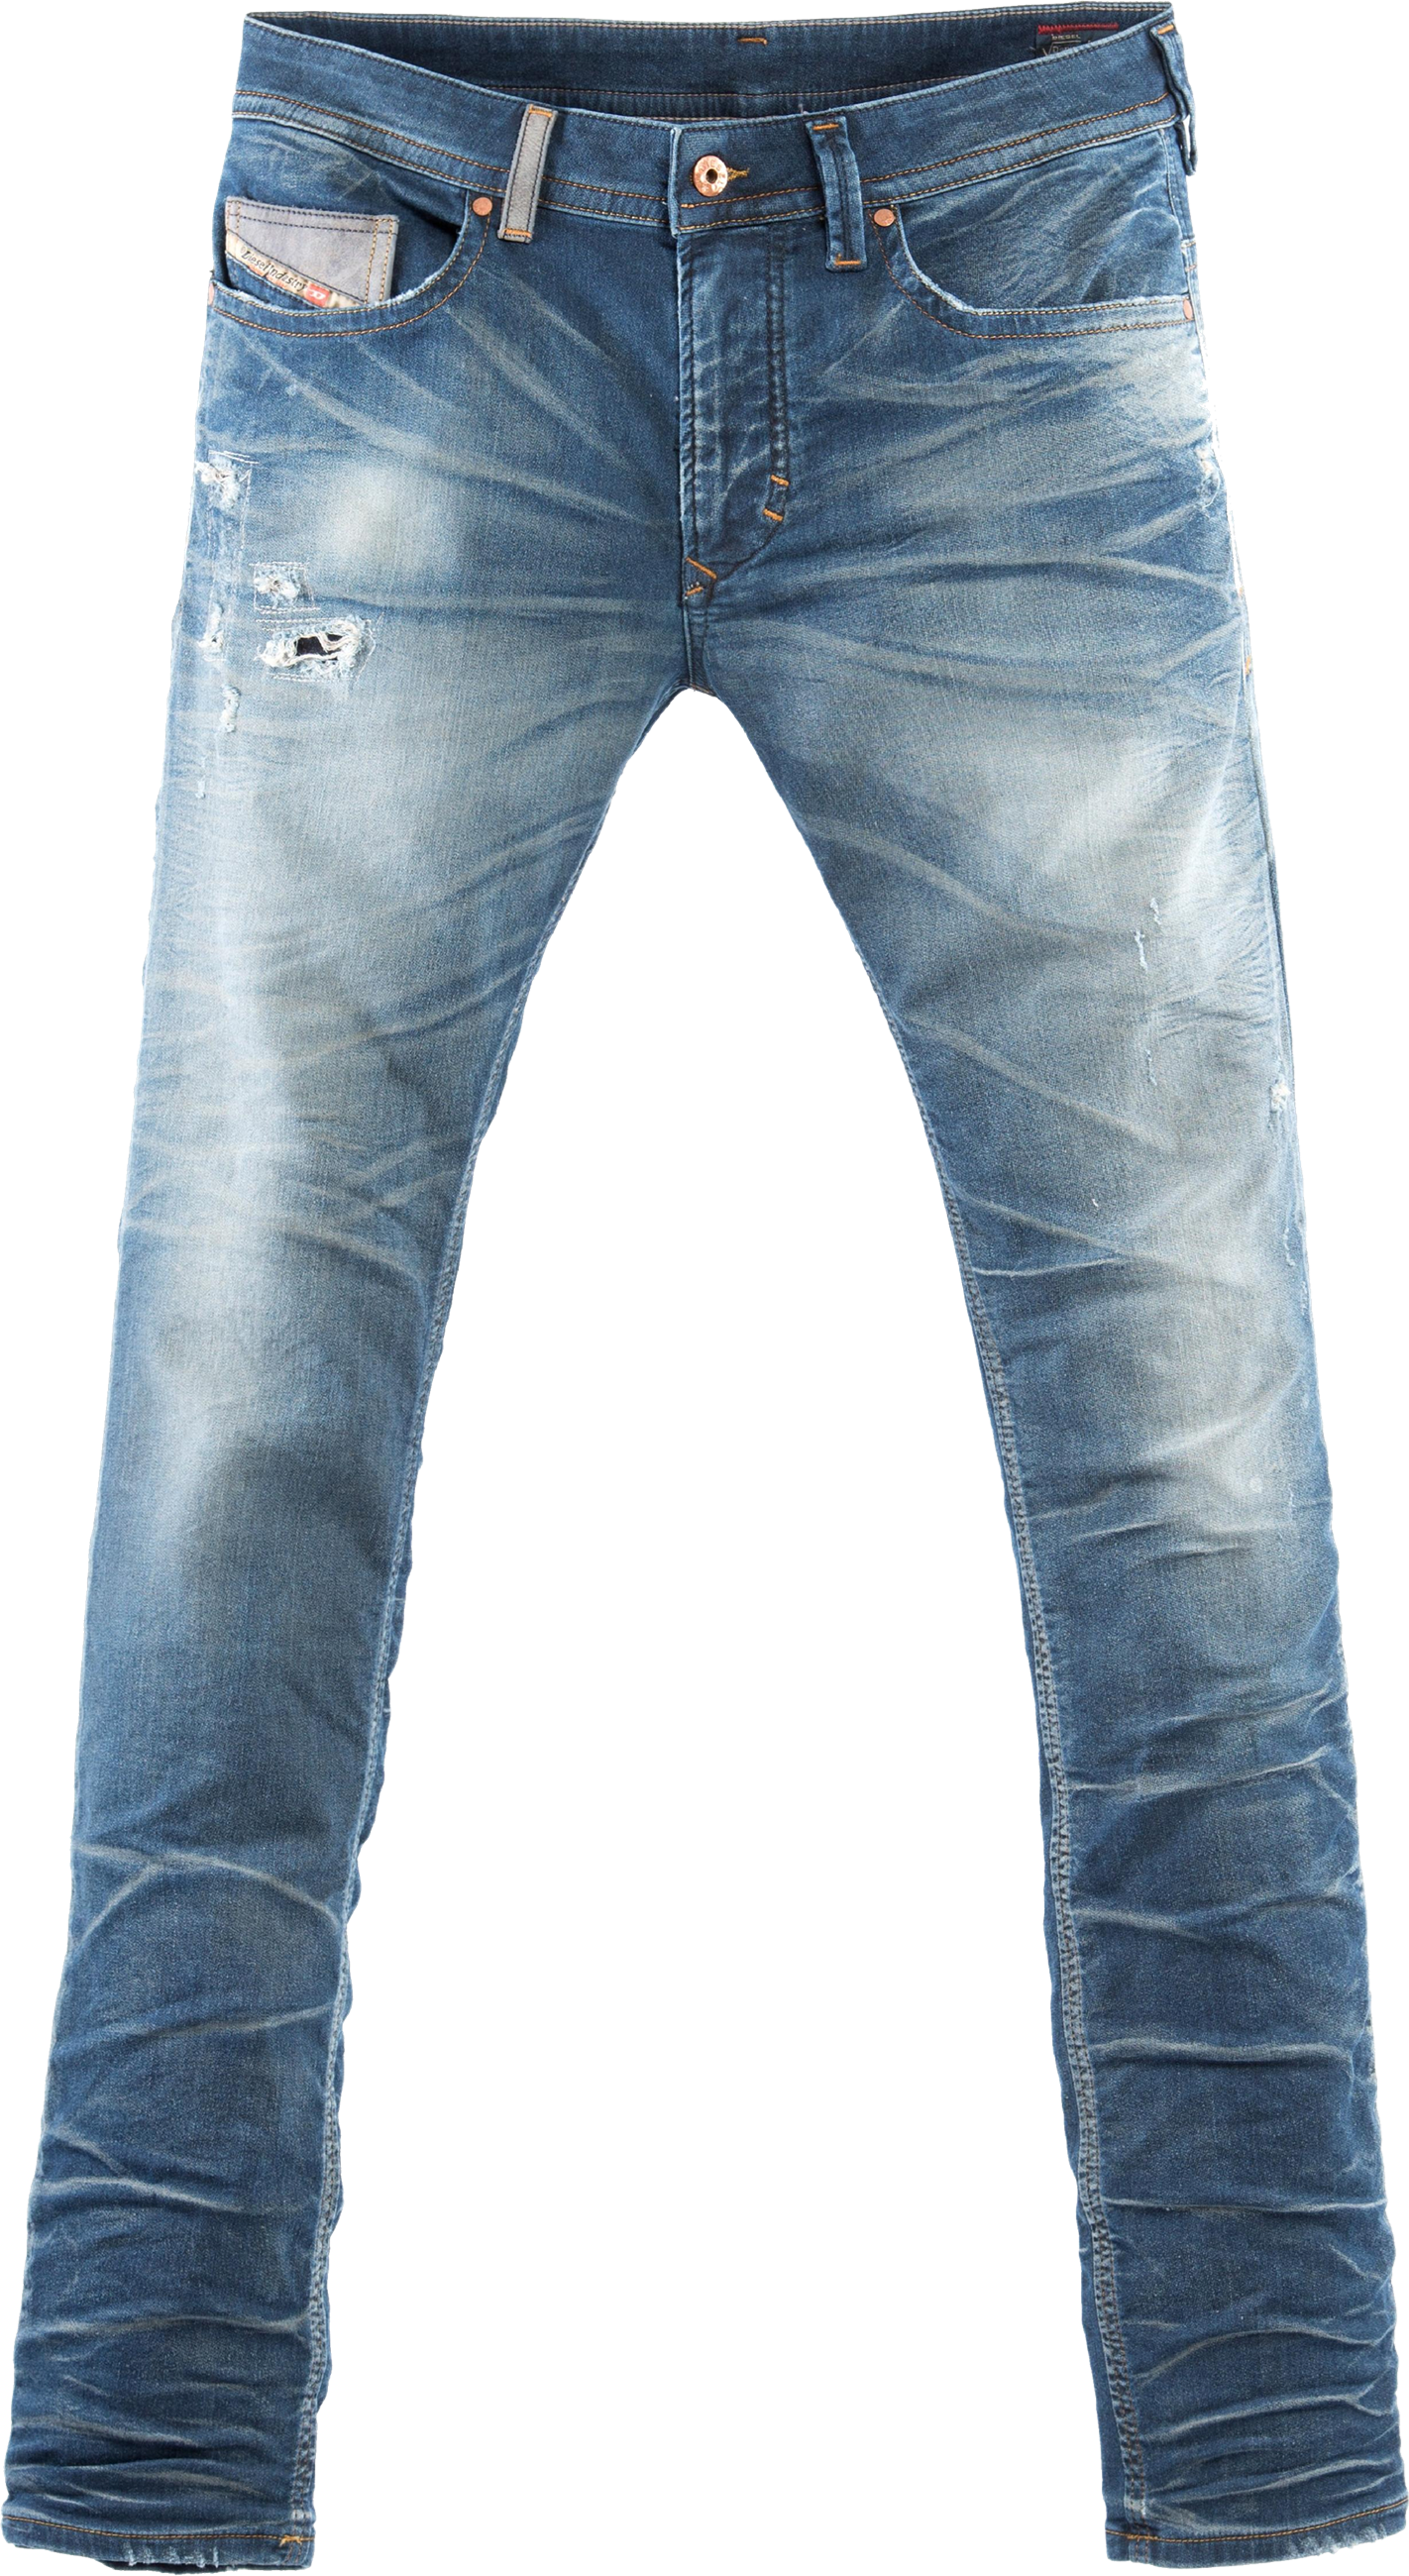 jeans_png5767